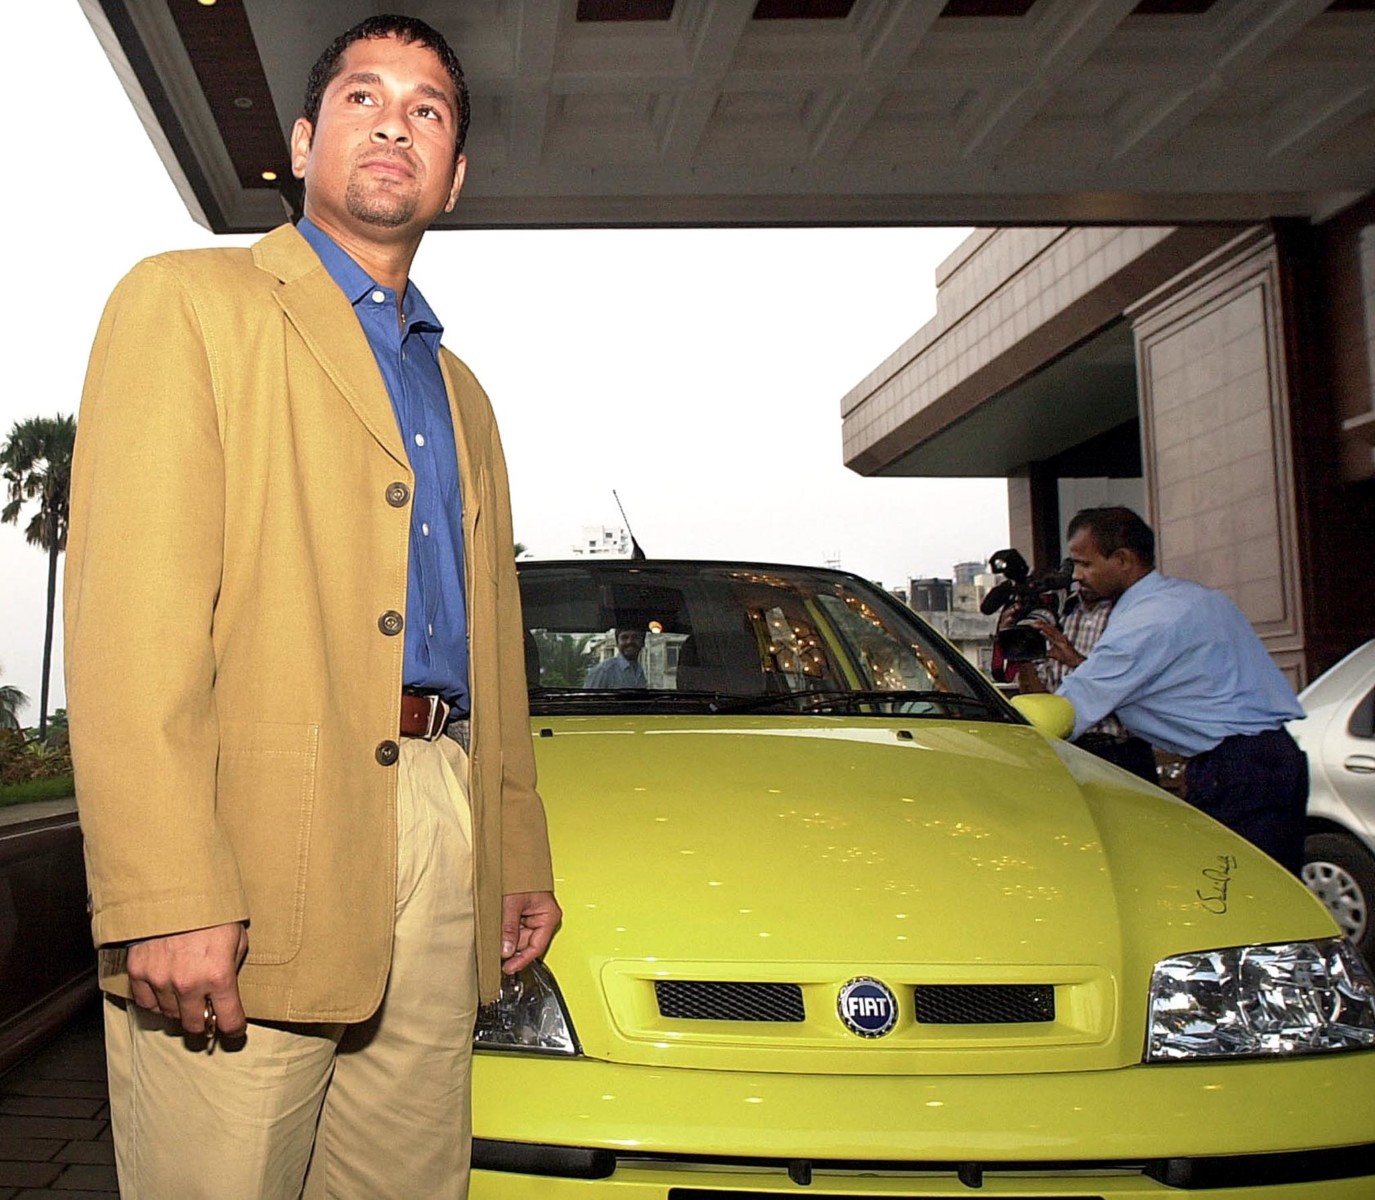 In the early 2000s Tendulkar became a spokesperson for Fiat and was gifted this Palio S10